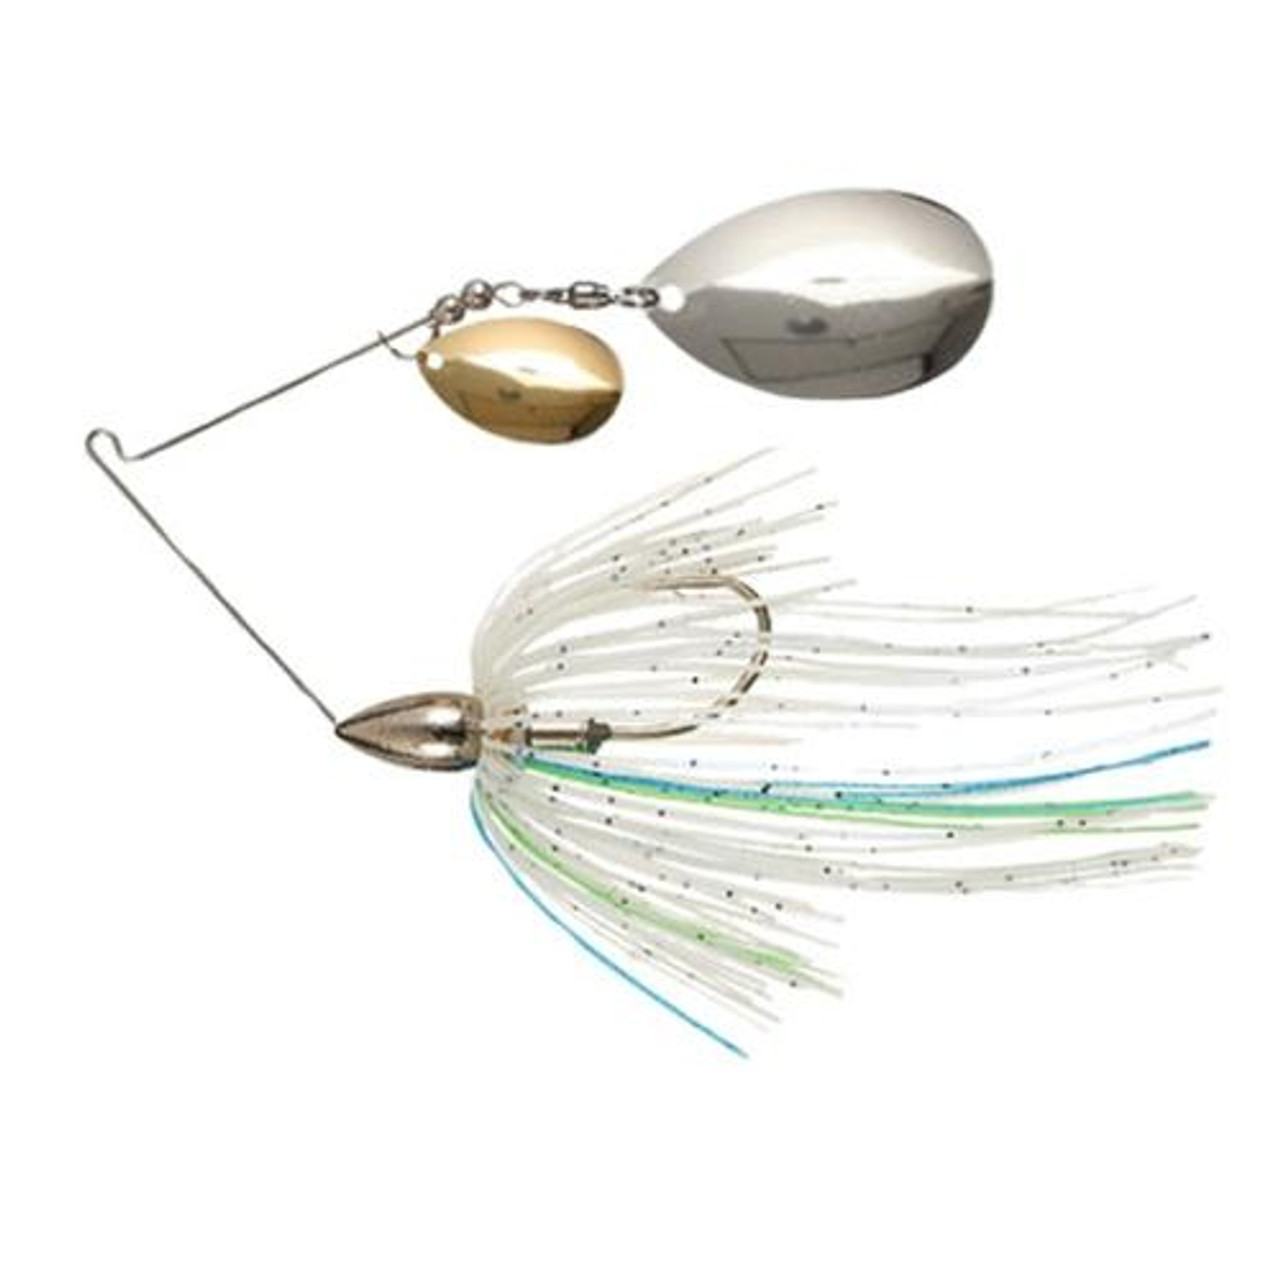 https://cdn11.bigcommerce.com/s-70mih4s/images/stencil/1280x1280/products/7214/26425/War-Eagle-Tandem-Colorado-Spinnerbaits-3_8oz-657139214046_image1__71282.1434039624.jpg?c=2